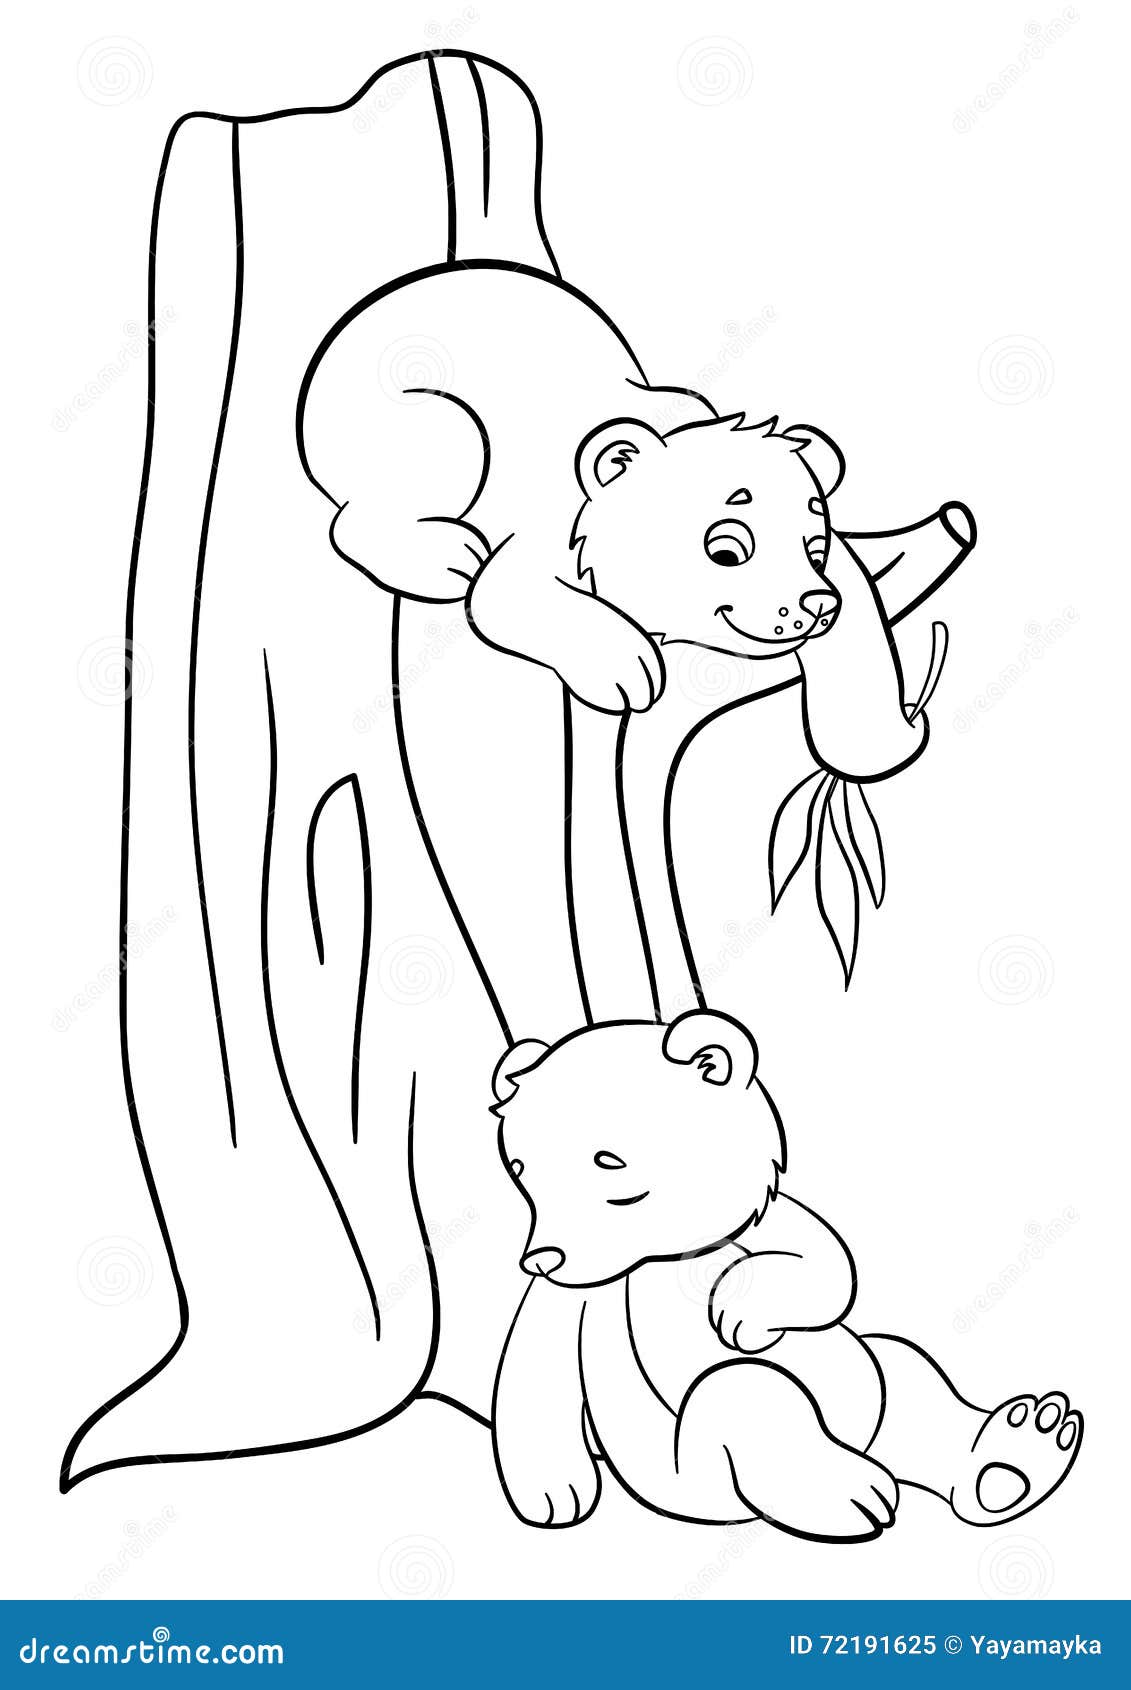 Coloring pages Wild animals Two little cute baby bears